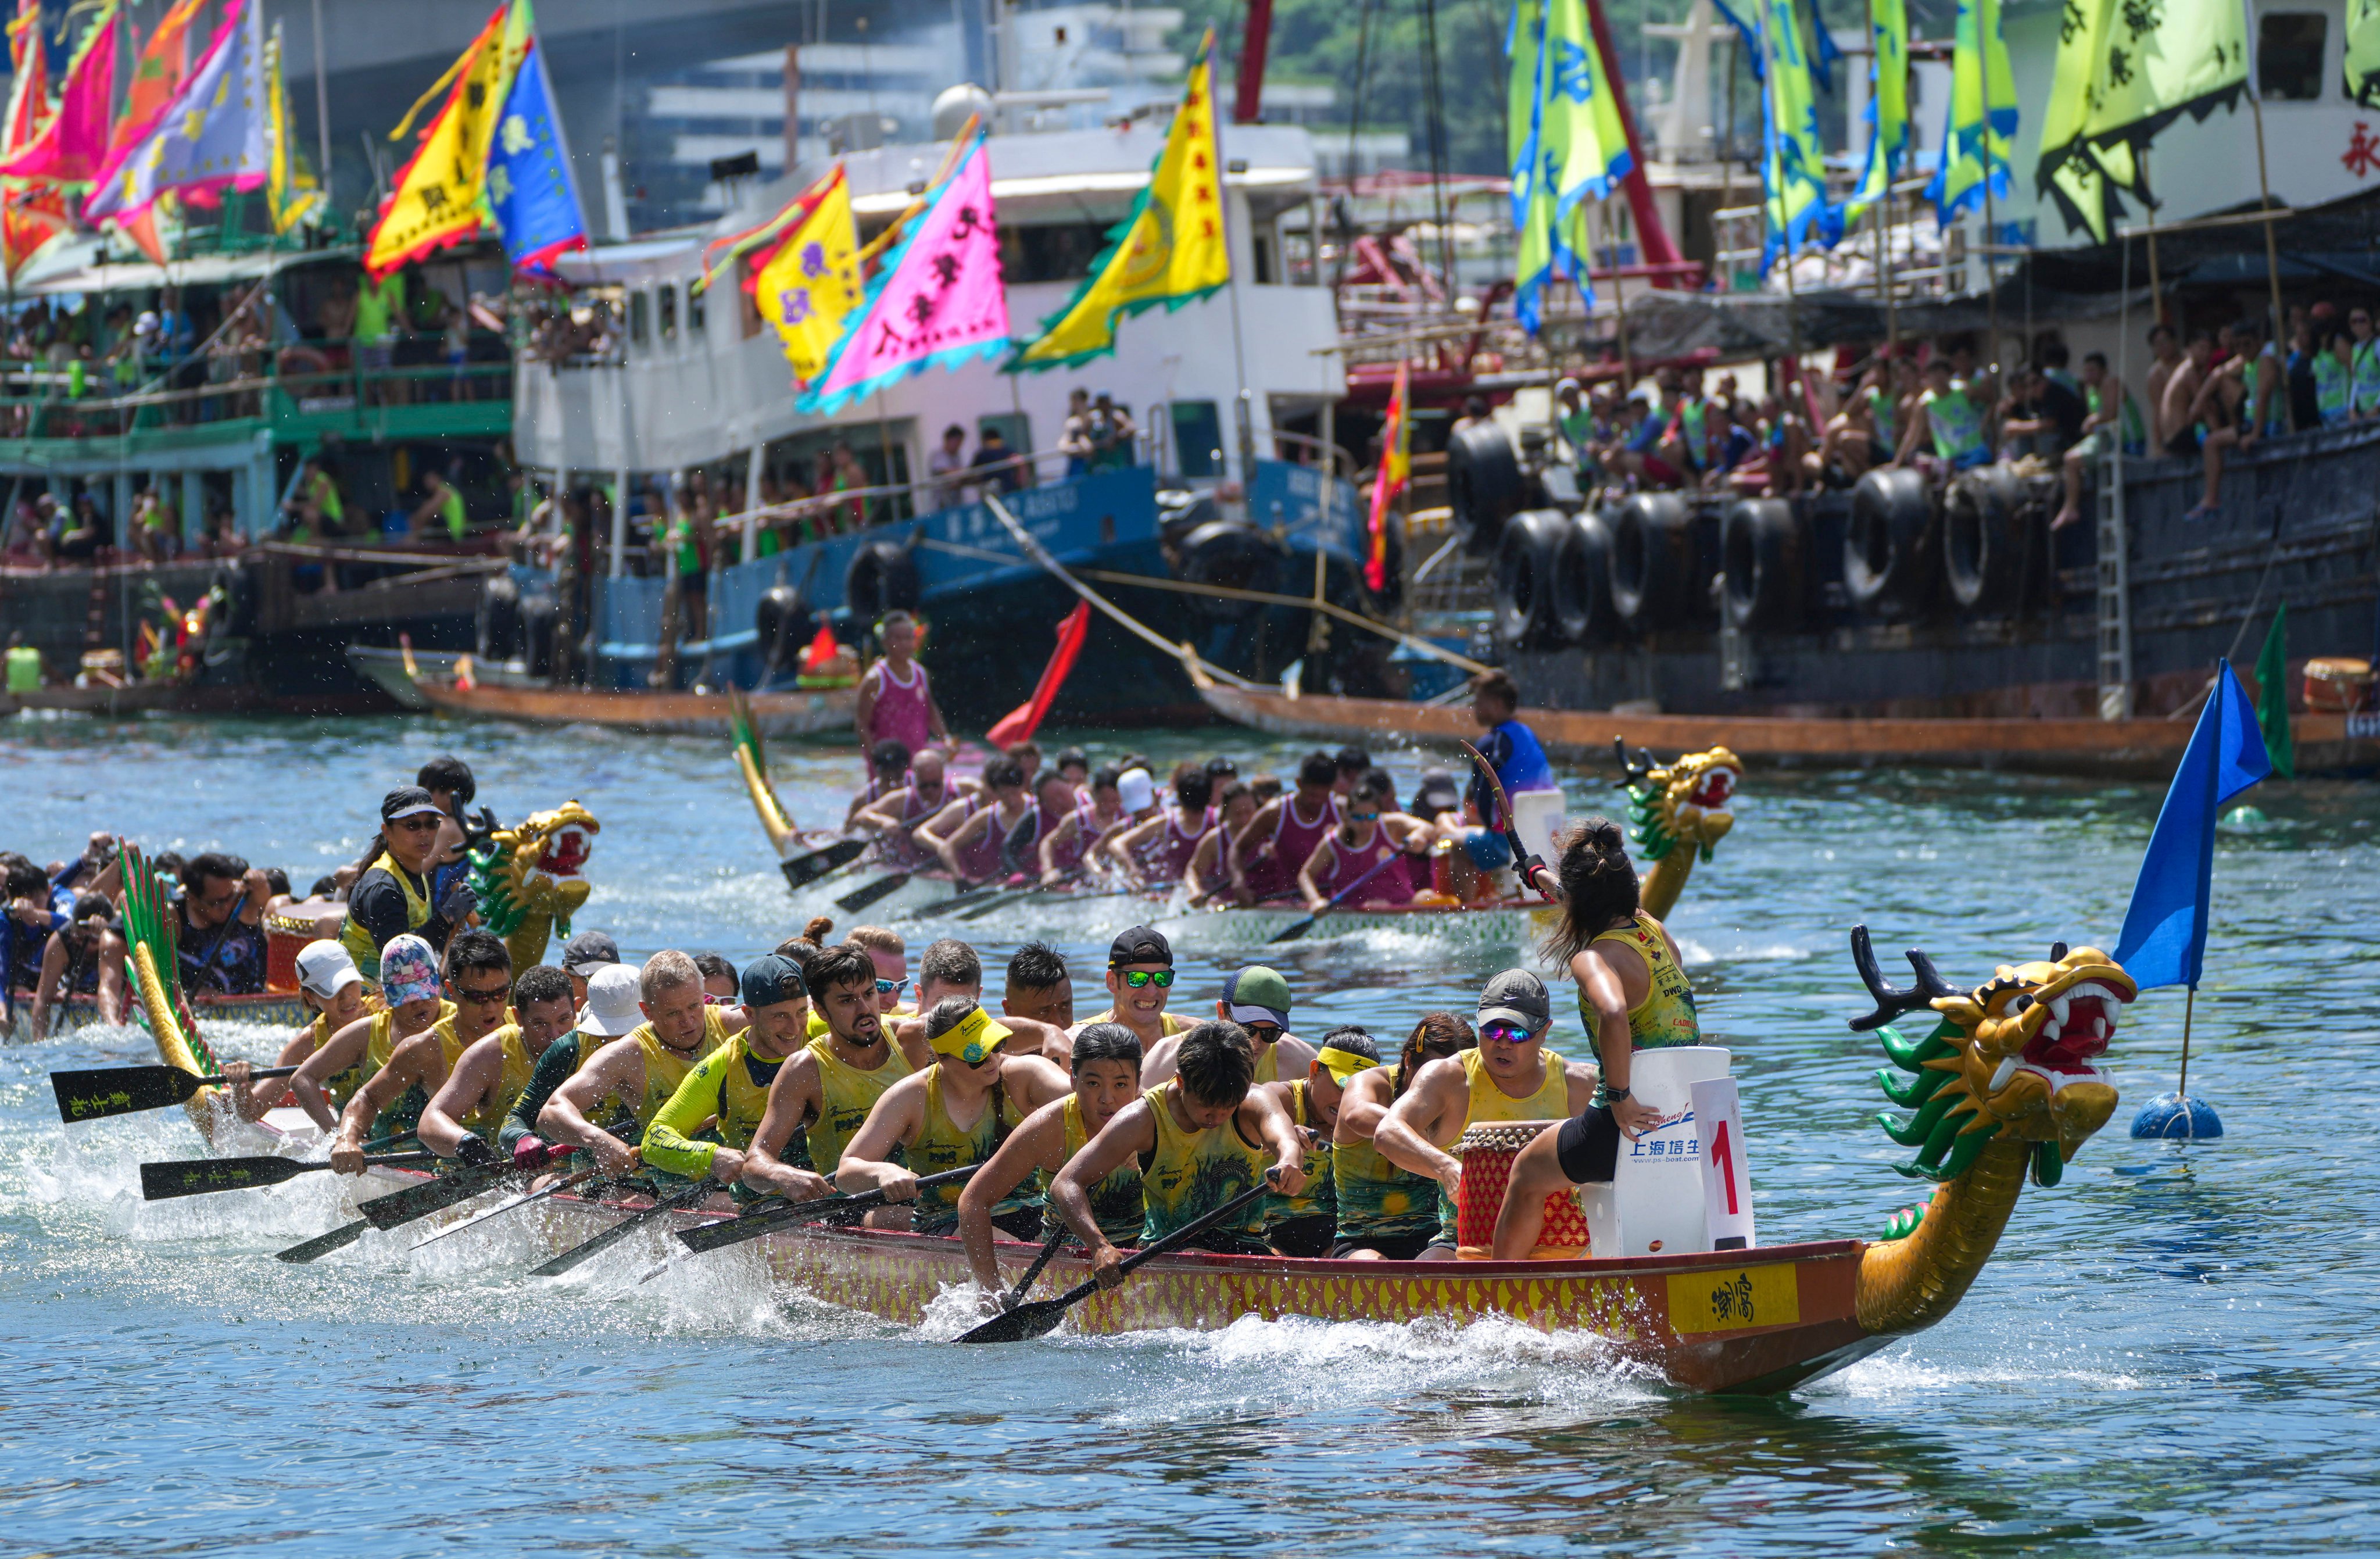 Rowers brave the heat to pit their skills against rivals in waters off Aberdeen. Photo: Sam Tsang